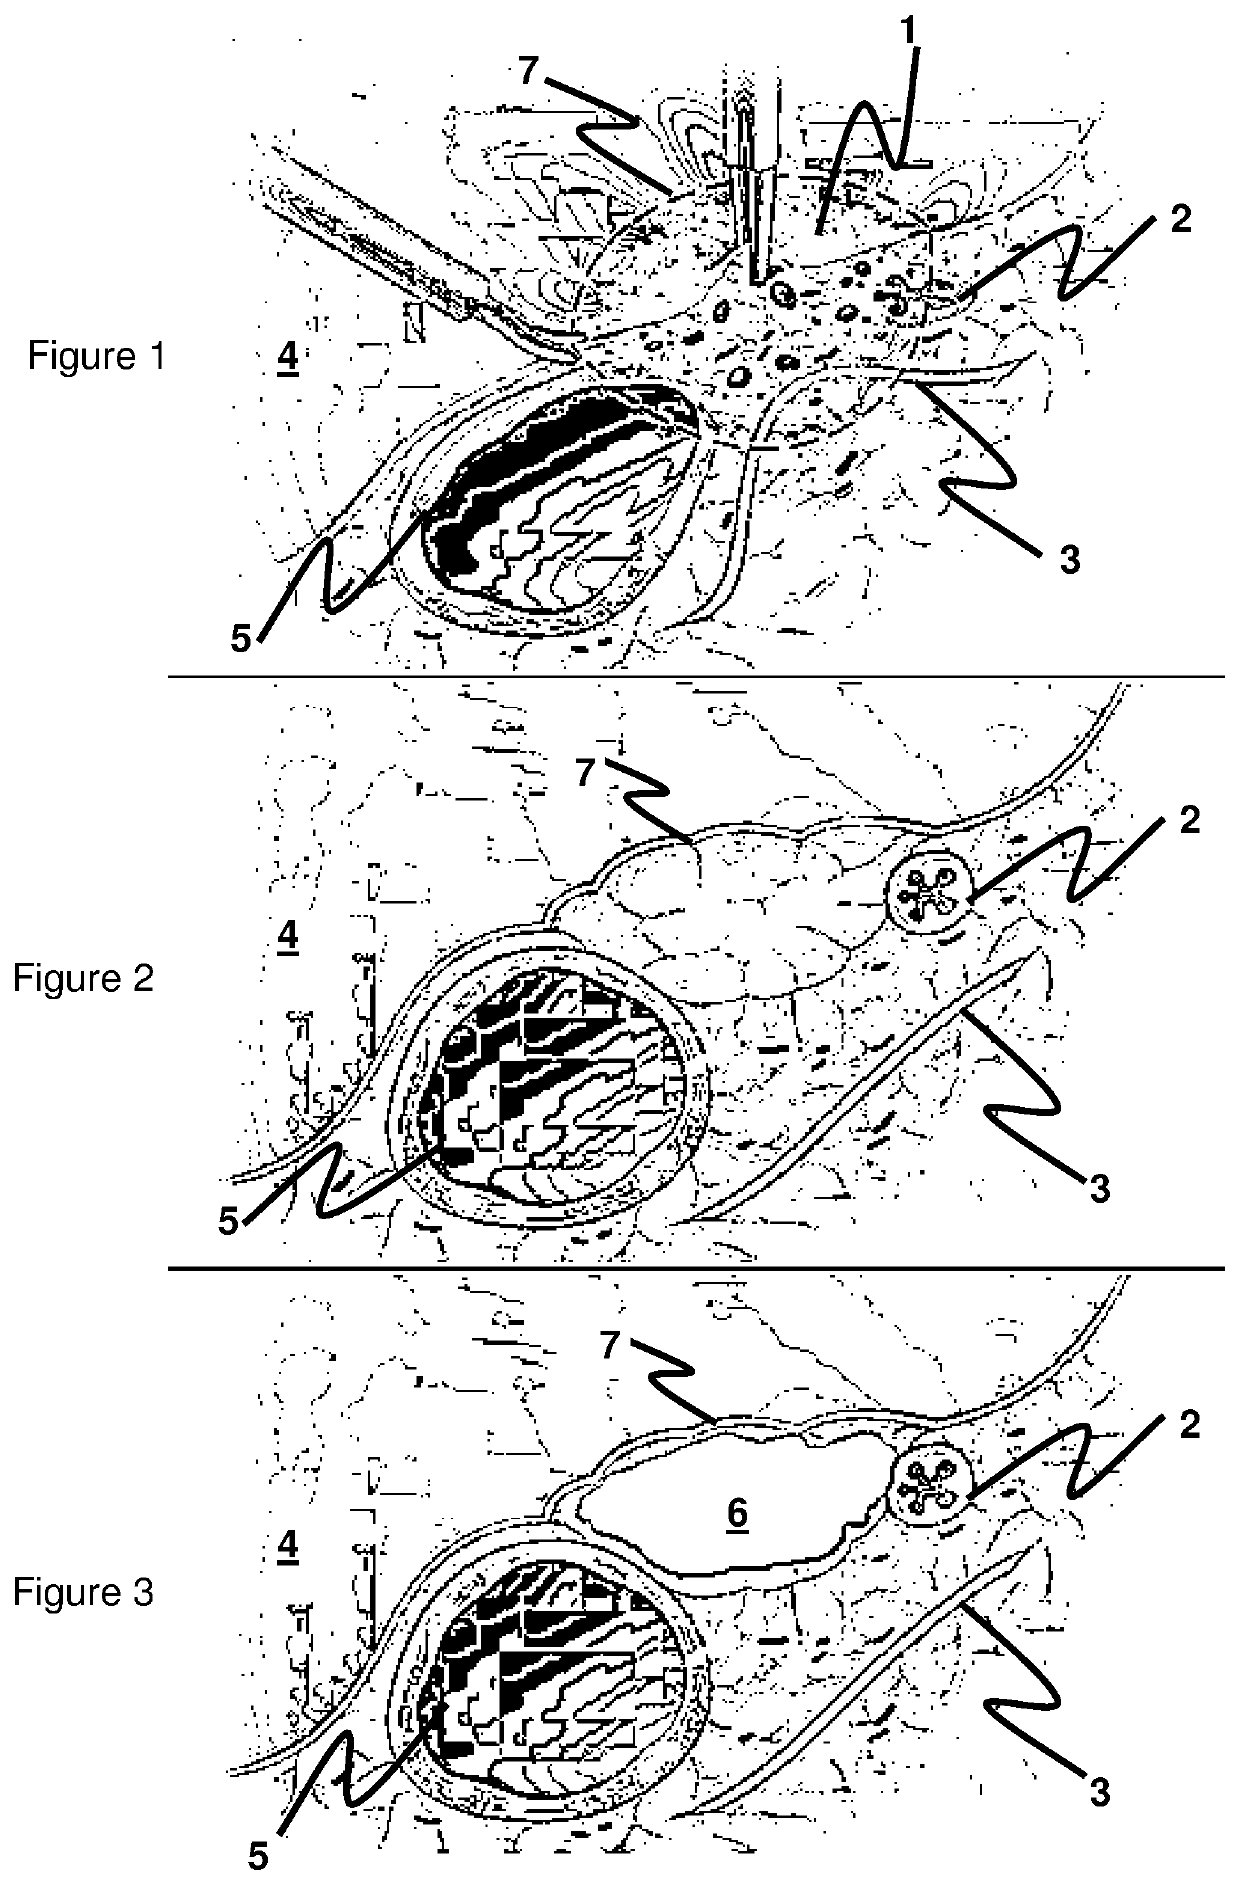 Therapeutic composition for endometriosis surgery and method for using the same